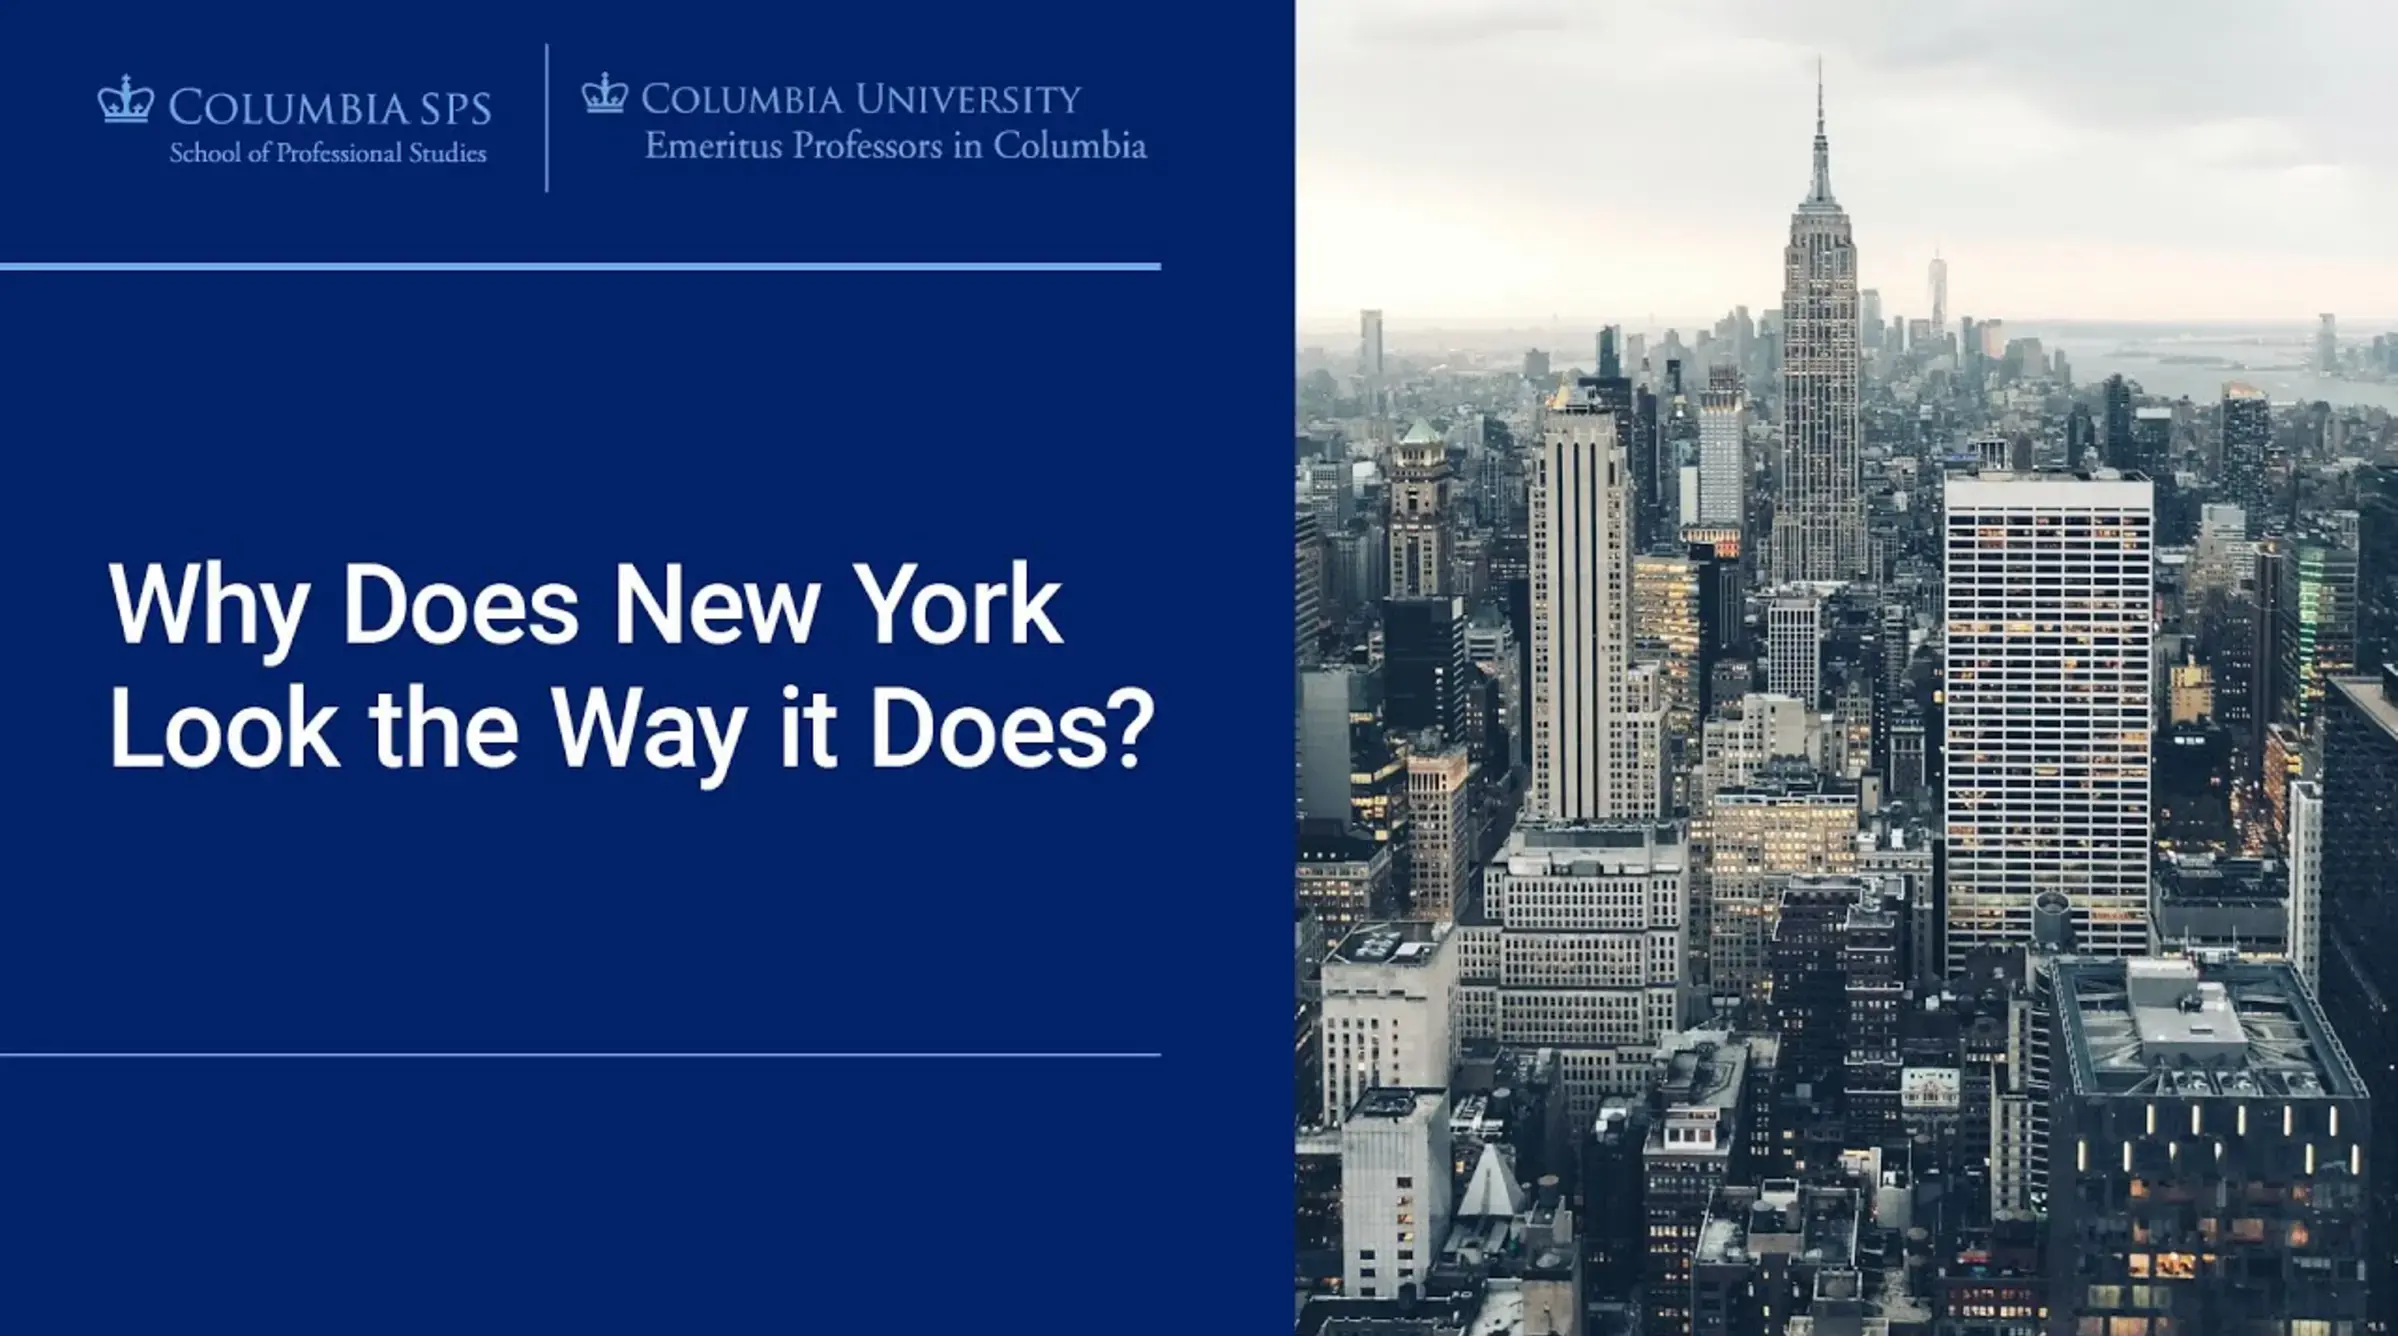 EPIC/SPS Lecture: Why Does New York Look the Way it Does?